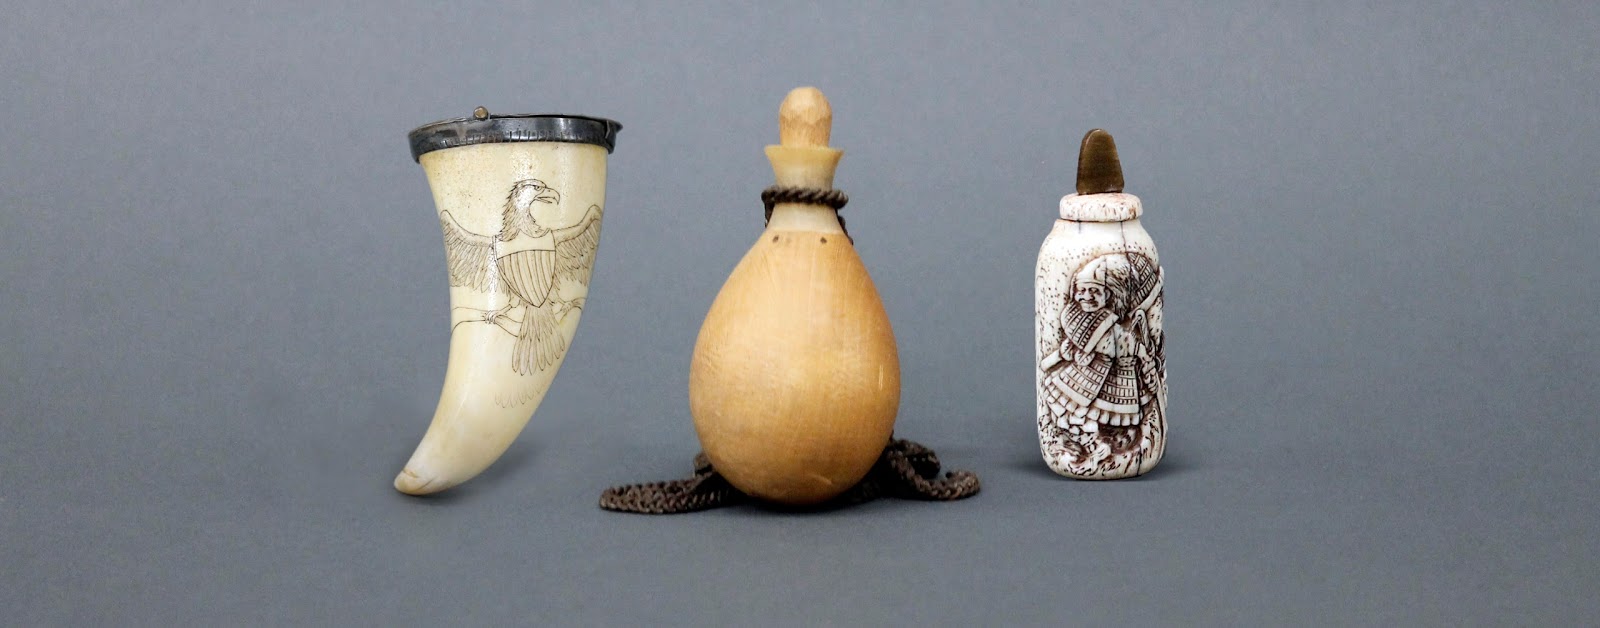 Up to Snuff: Smokeless Tobacco Bottles from Around the World - EasyBlog -  Bowers Museum